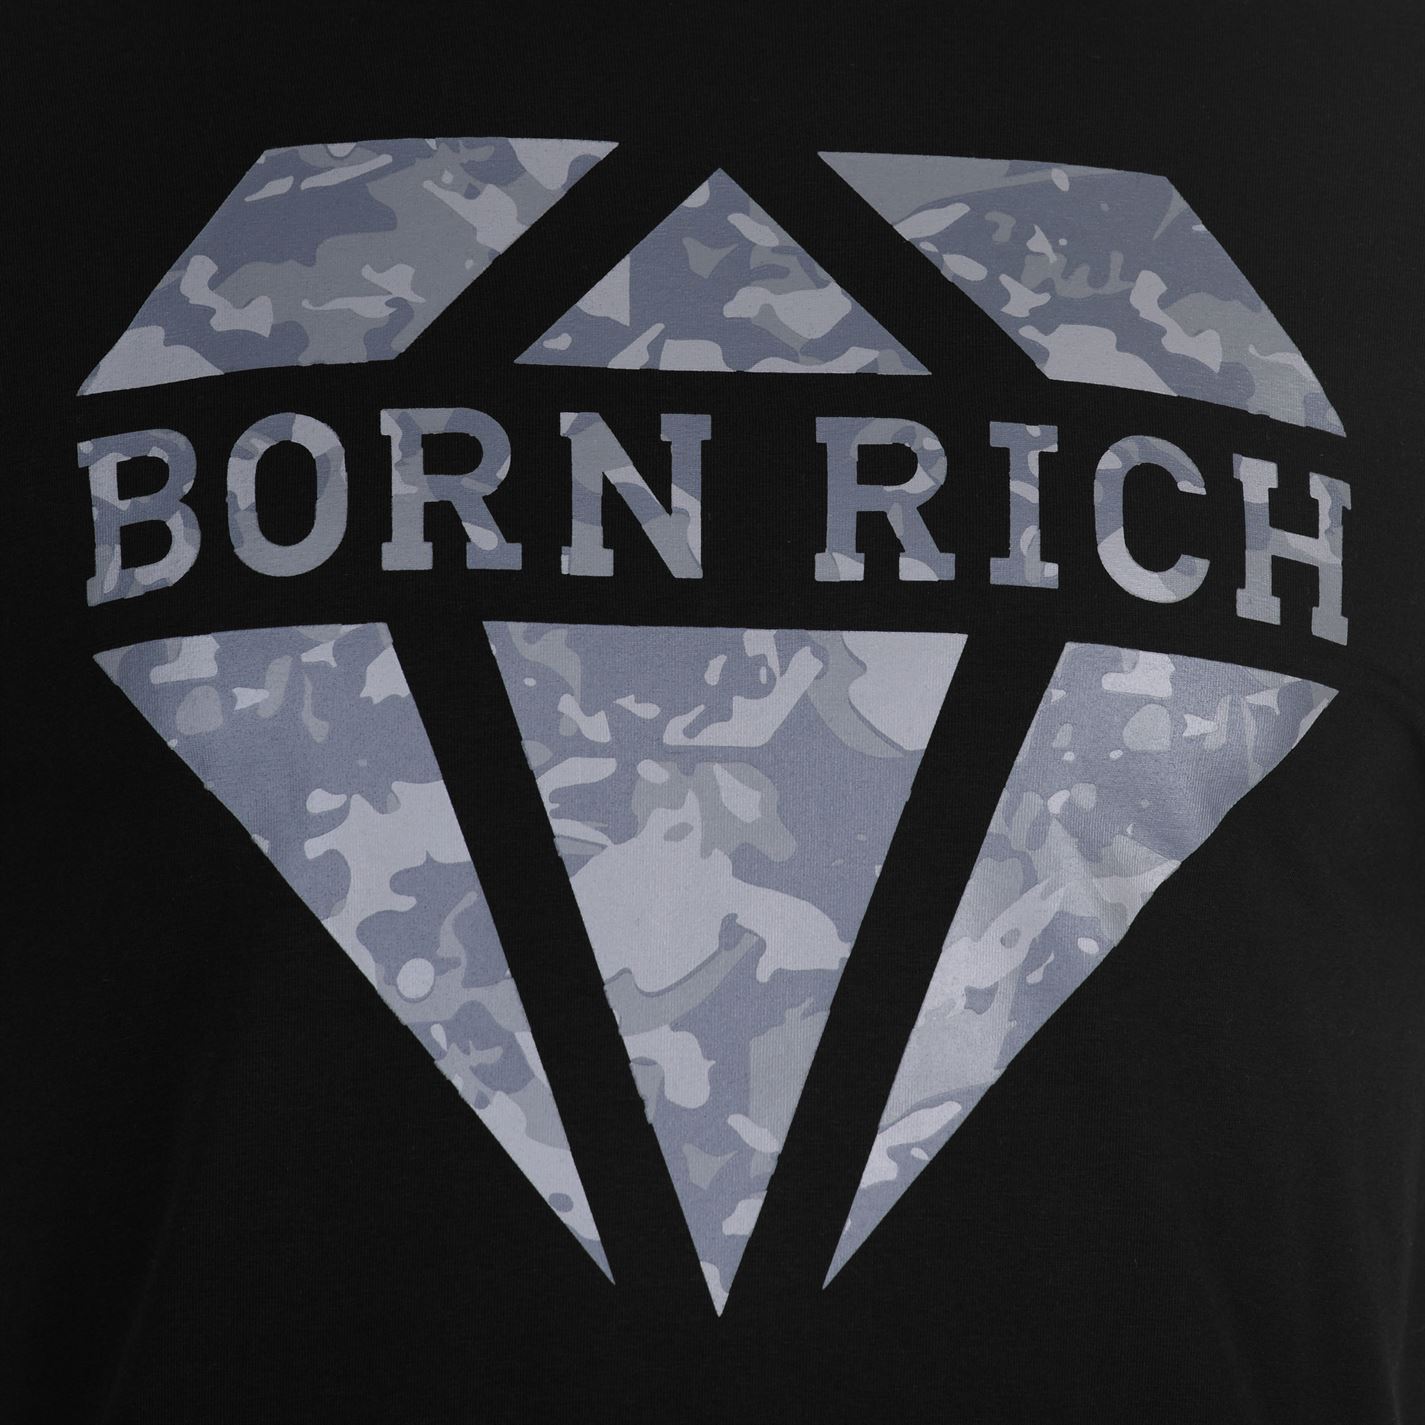 Born Rich Giggs T Shirt Mens Gents Crew Neck Tee Top Short Sleeve Round